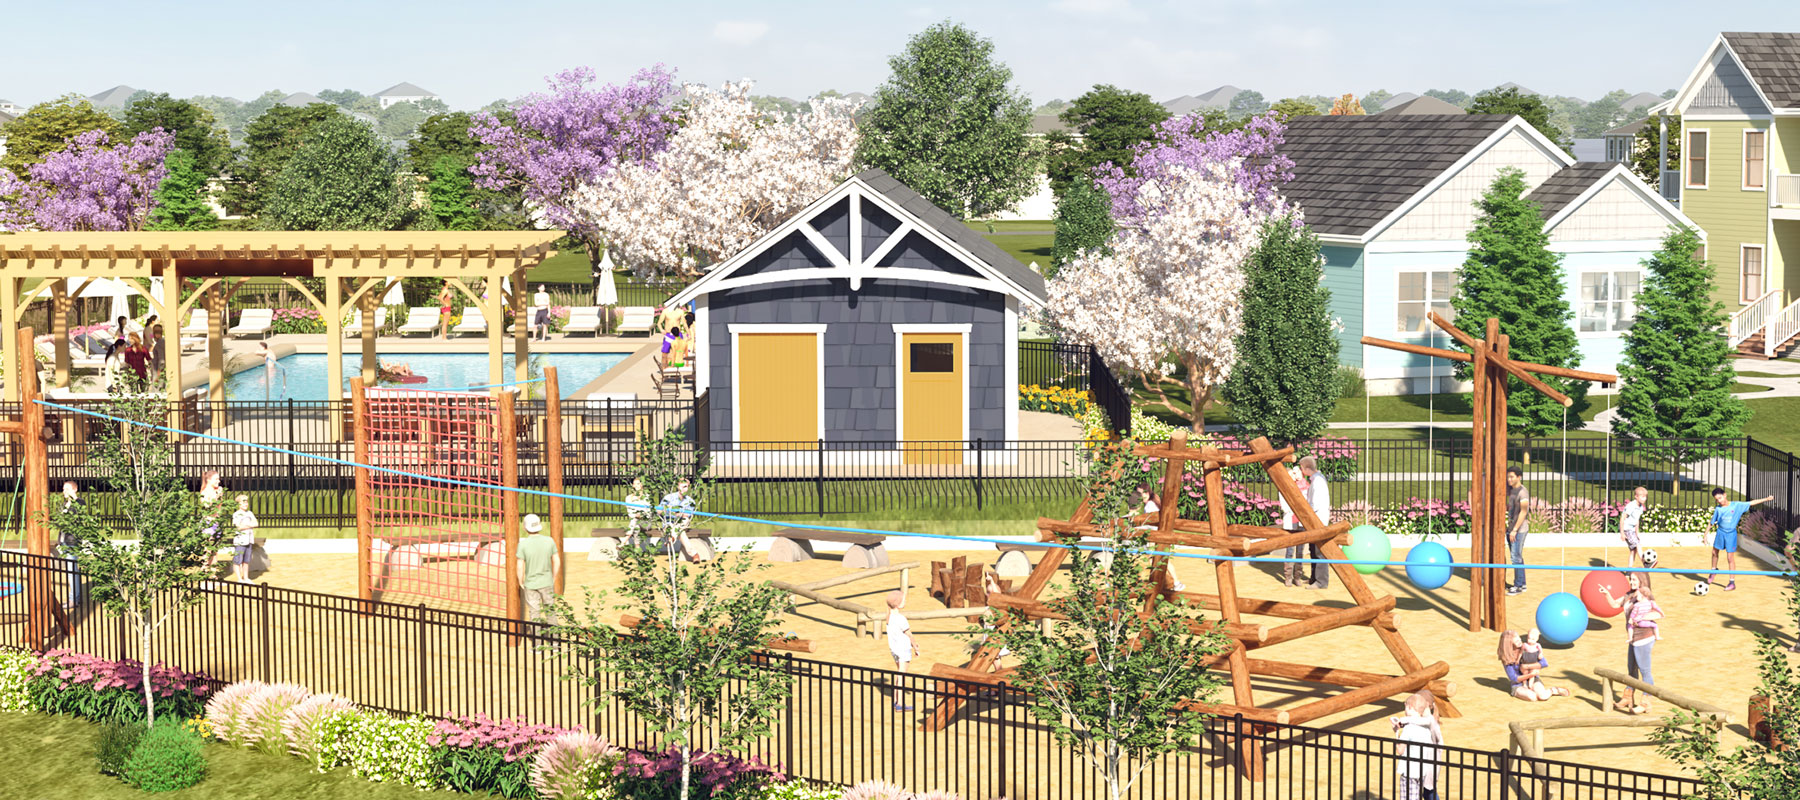 The Cove playground rendering